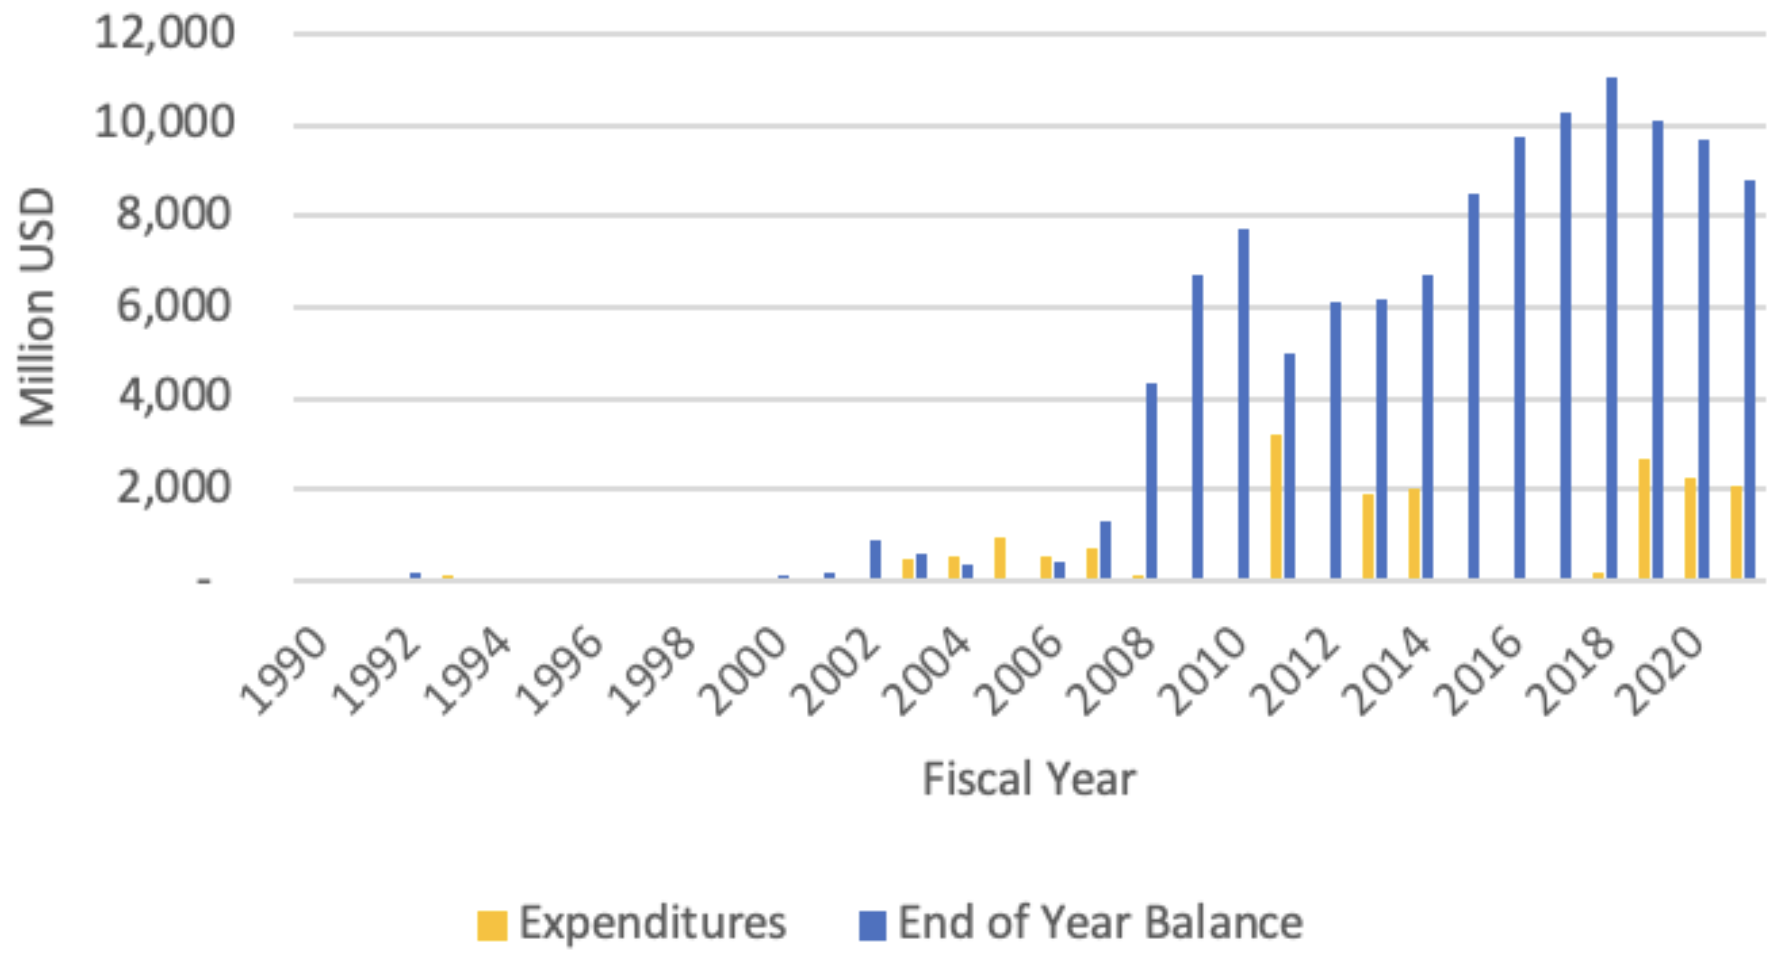 This graph compares ESF expenditures and balances over time.